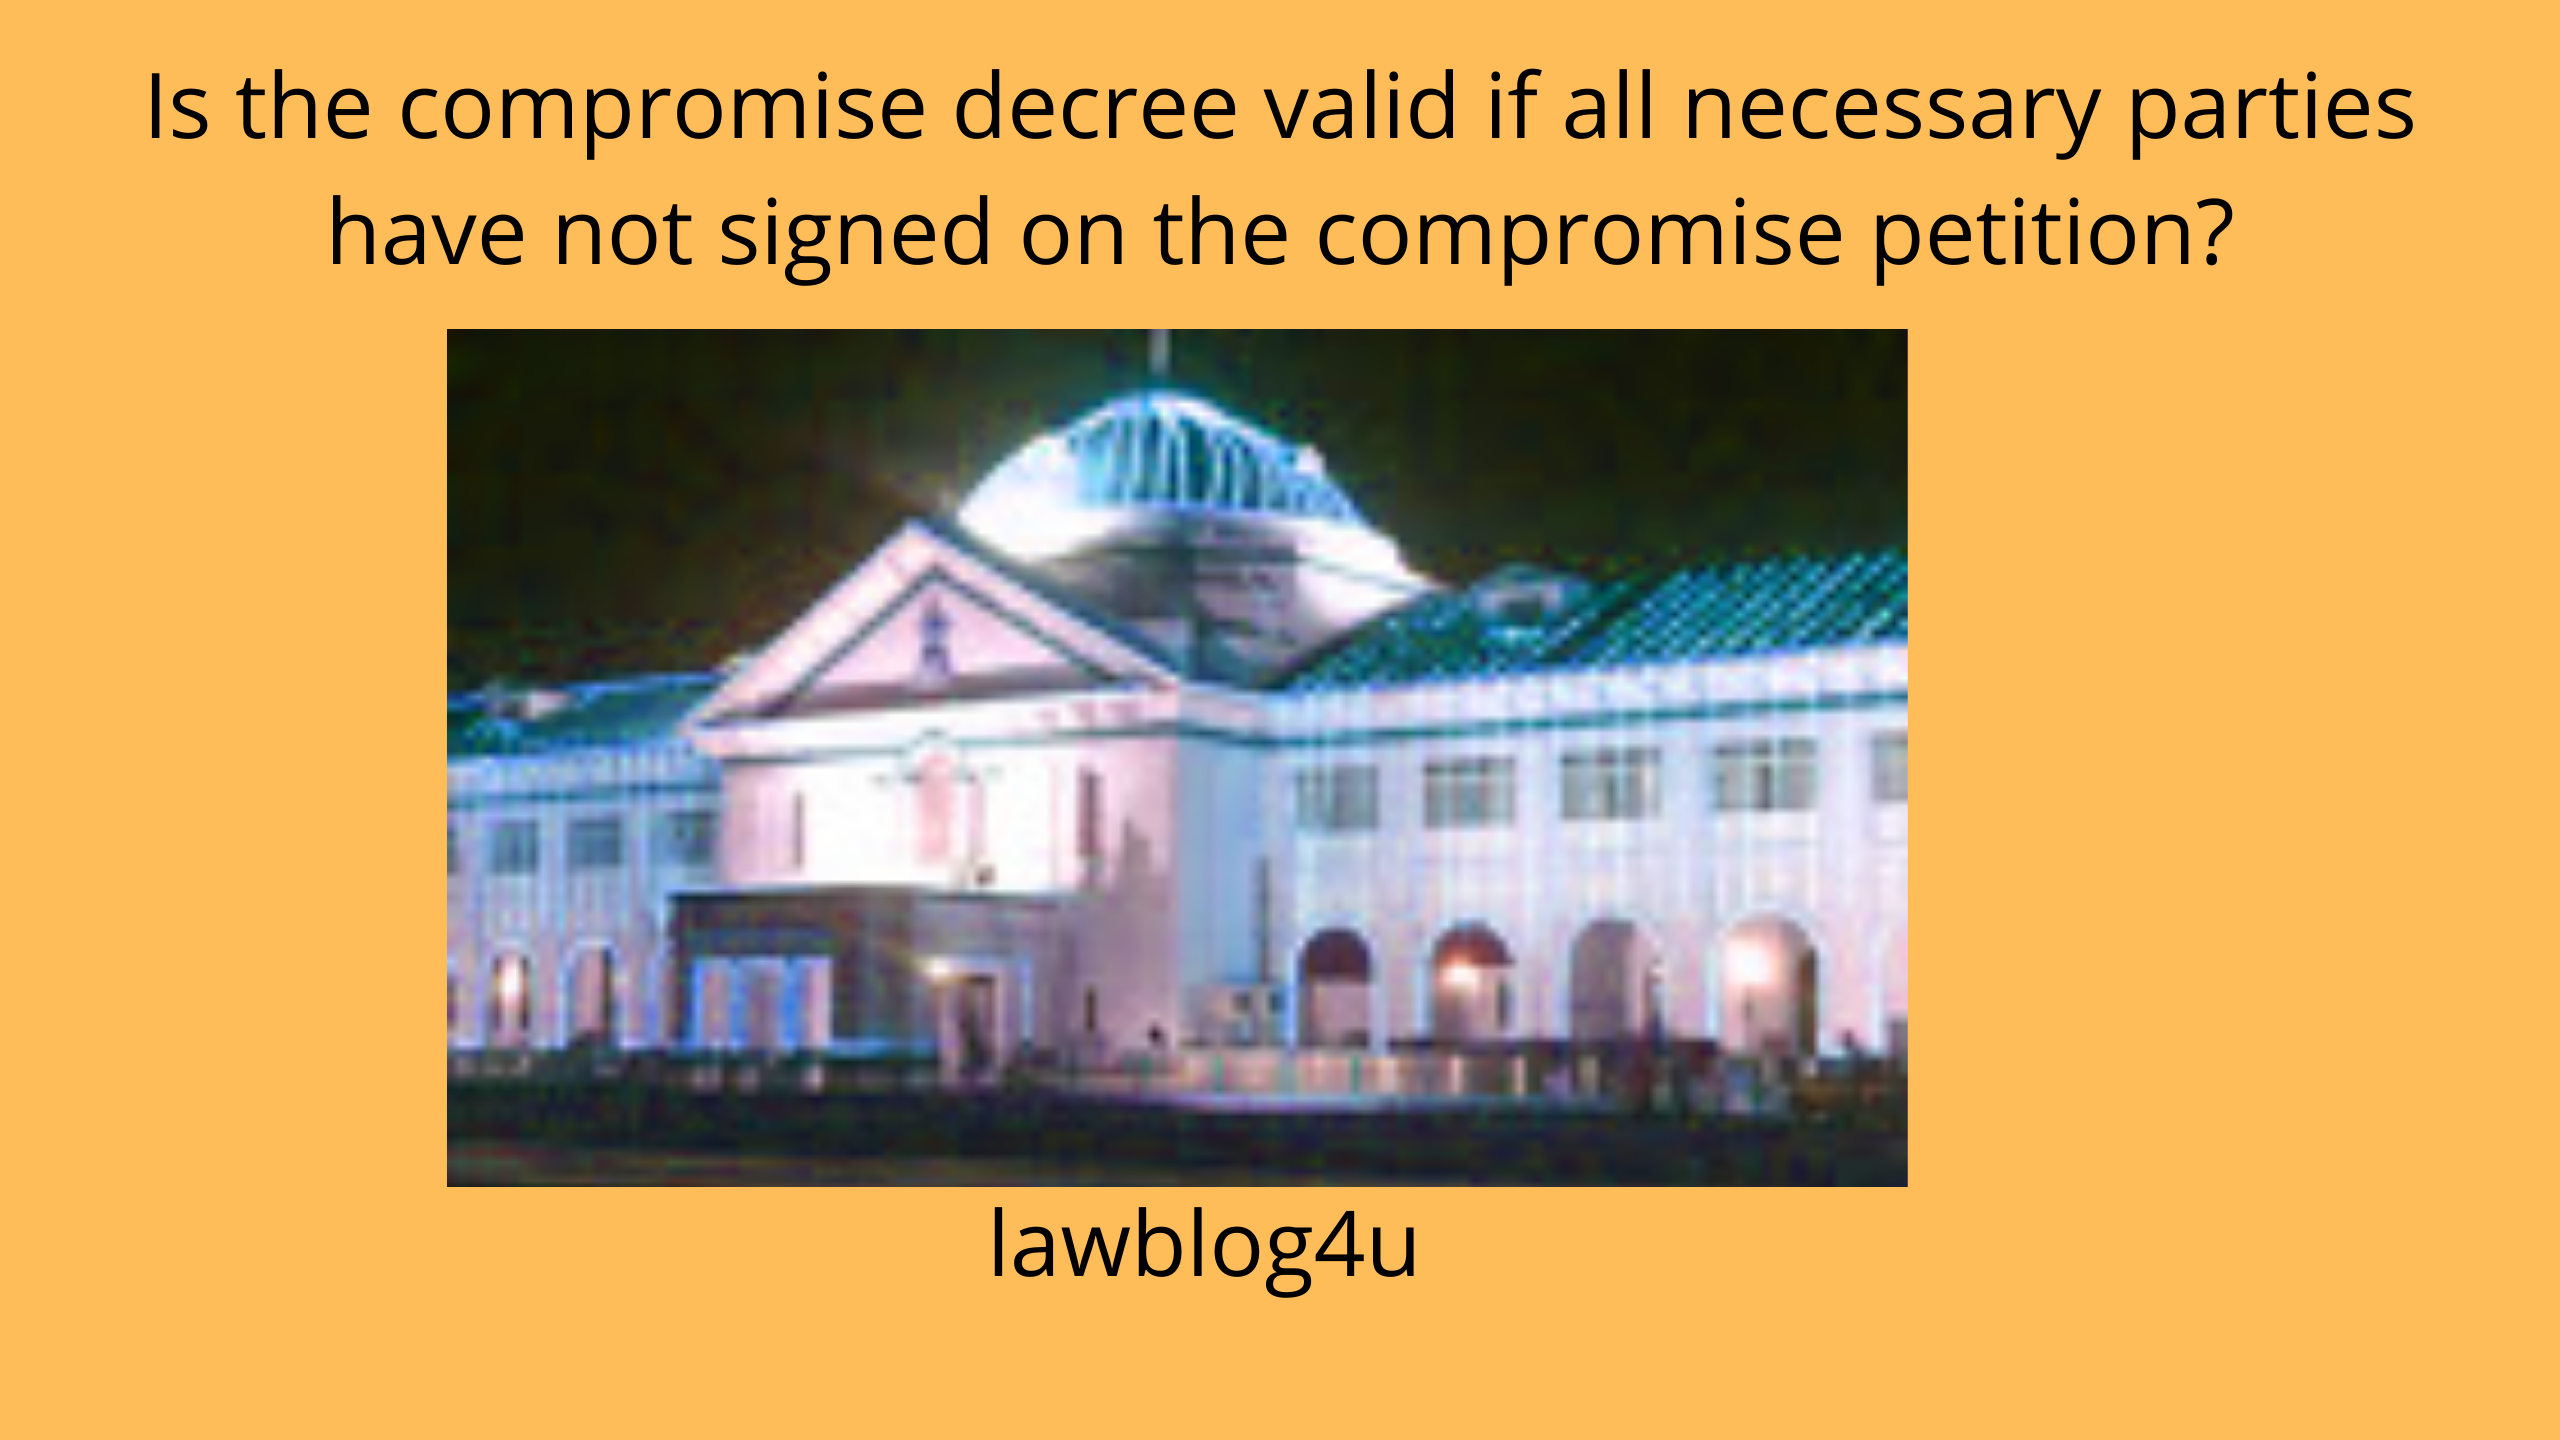 Is the compromise decree valid if all necessary parties have not signed on the compromise petition